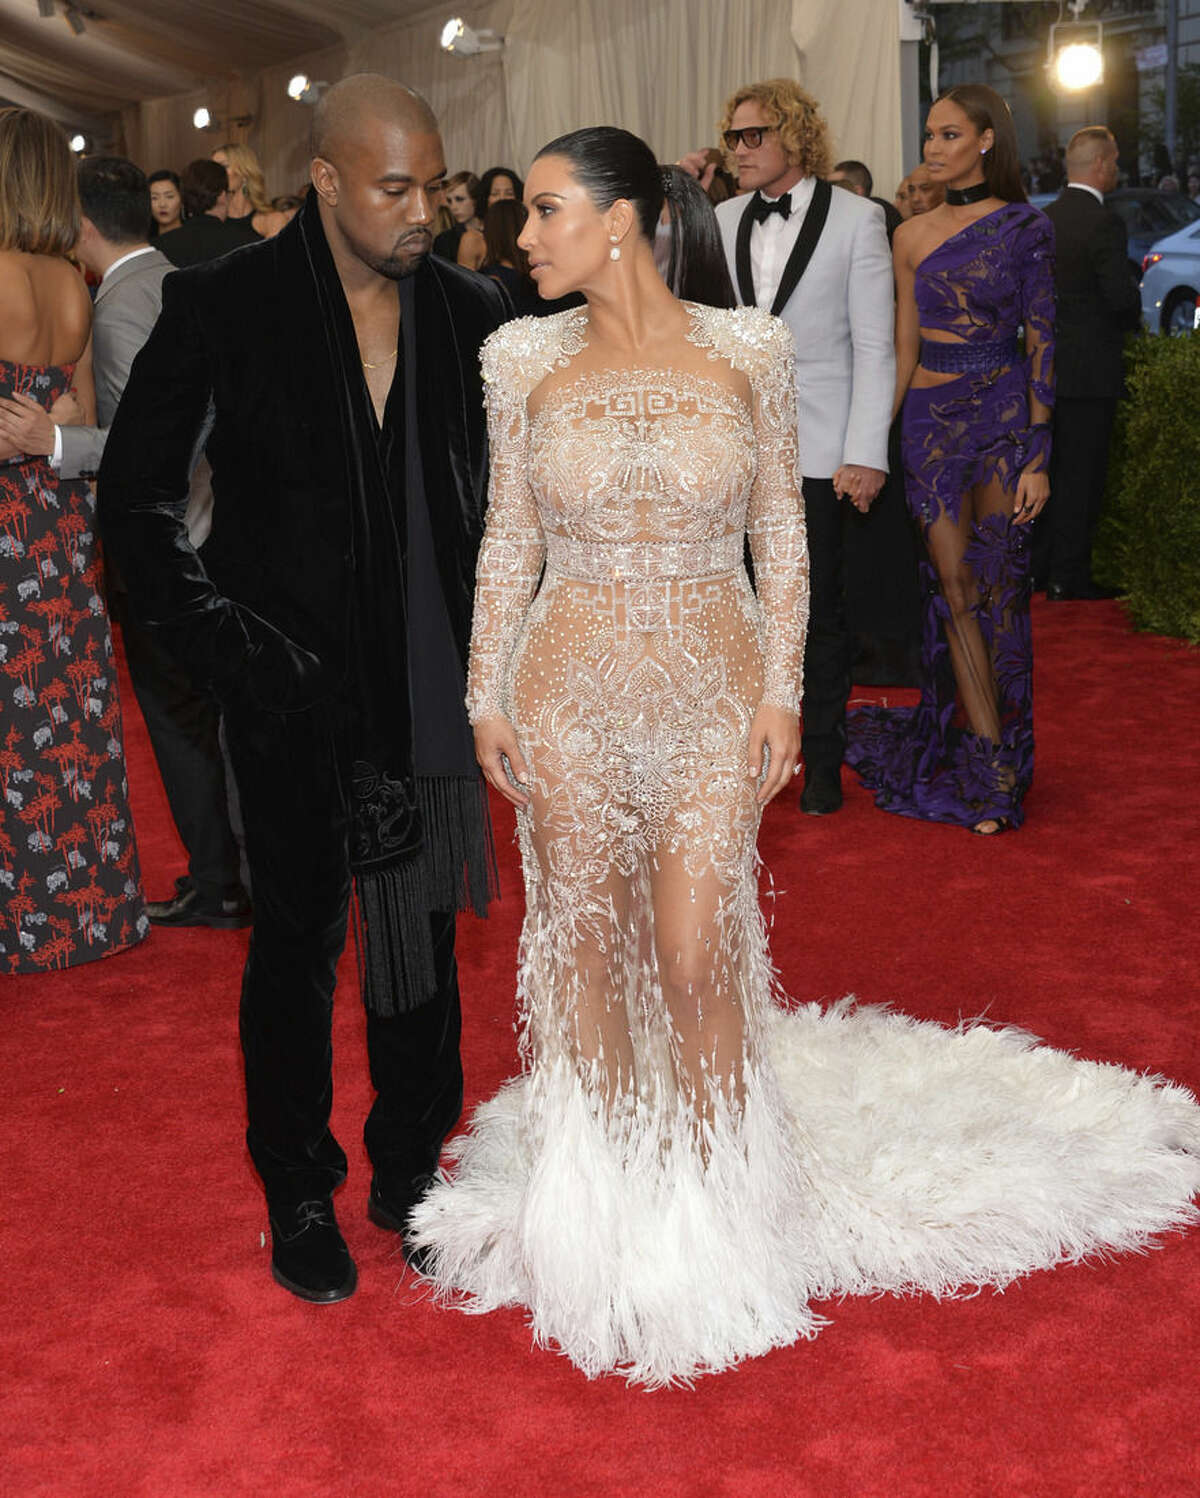 Kanye West, left, and Kim Kardashian arrive at The Metropolitan Museum of Art's Costume Institute benefit gala celebrating "China: Through the Looking Glass" on Monday, May 4, 2015, in New York. (Photo by Evan Agostini/Invision/AP)